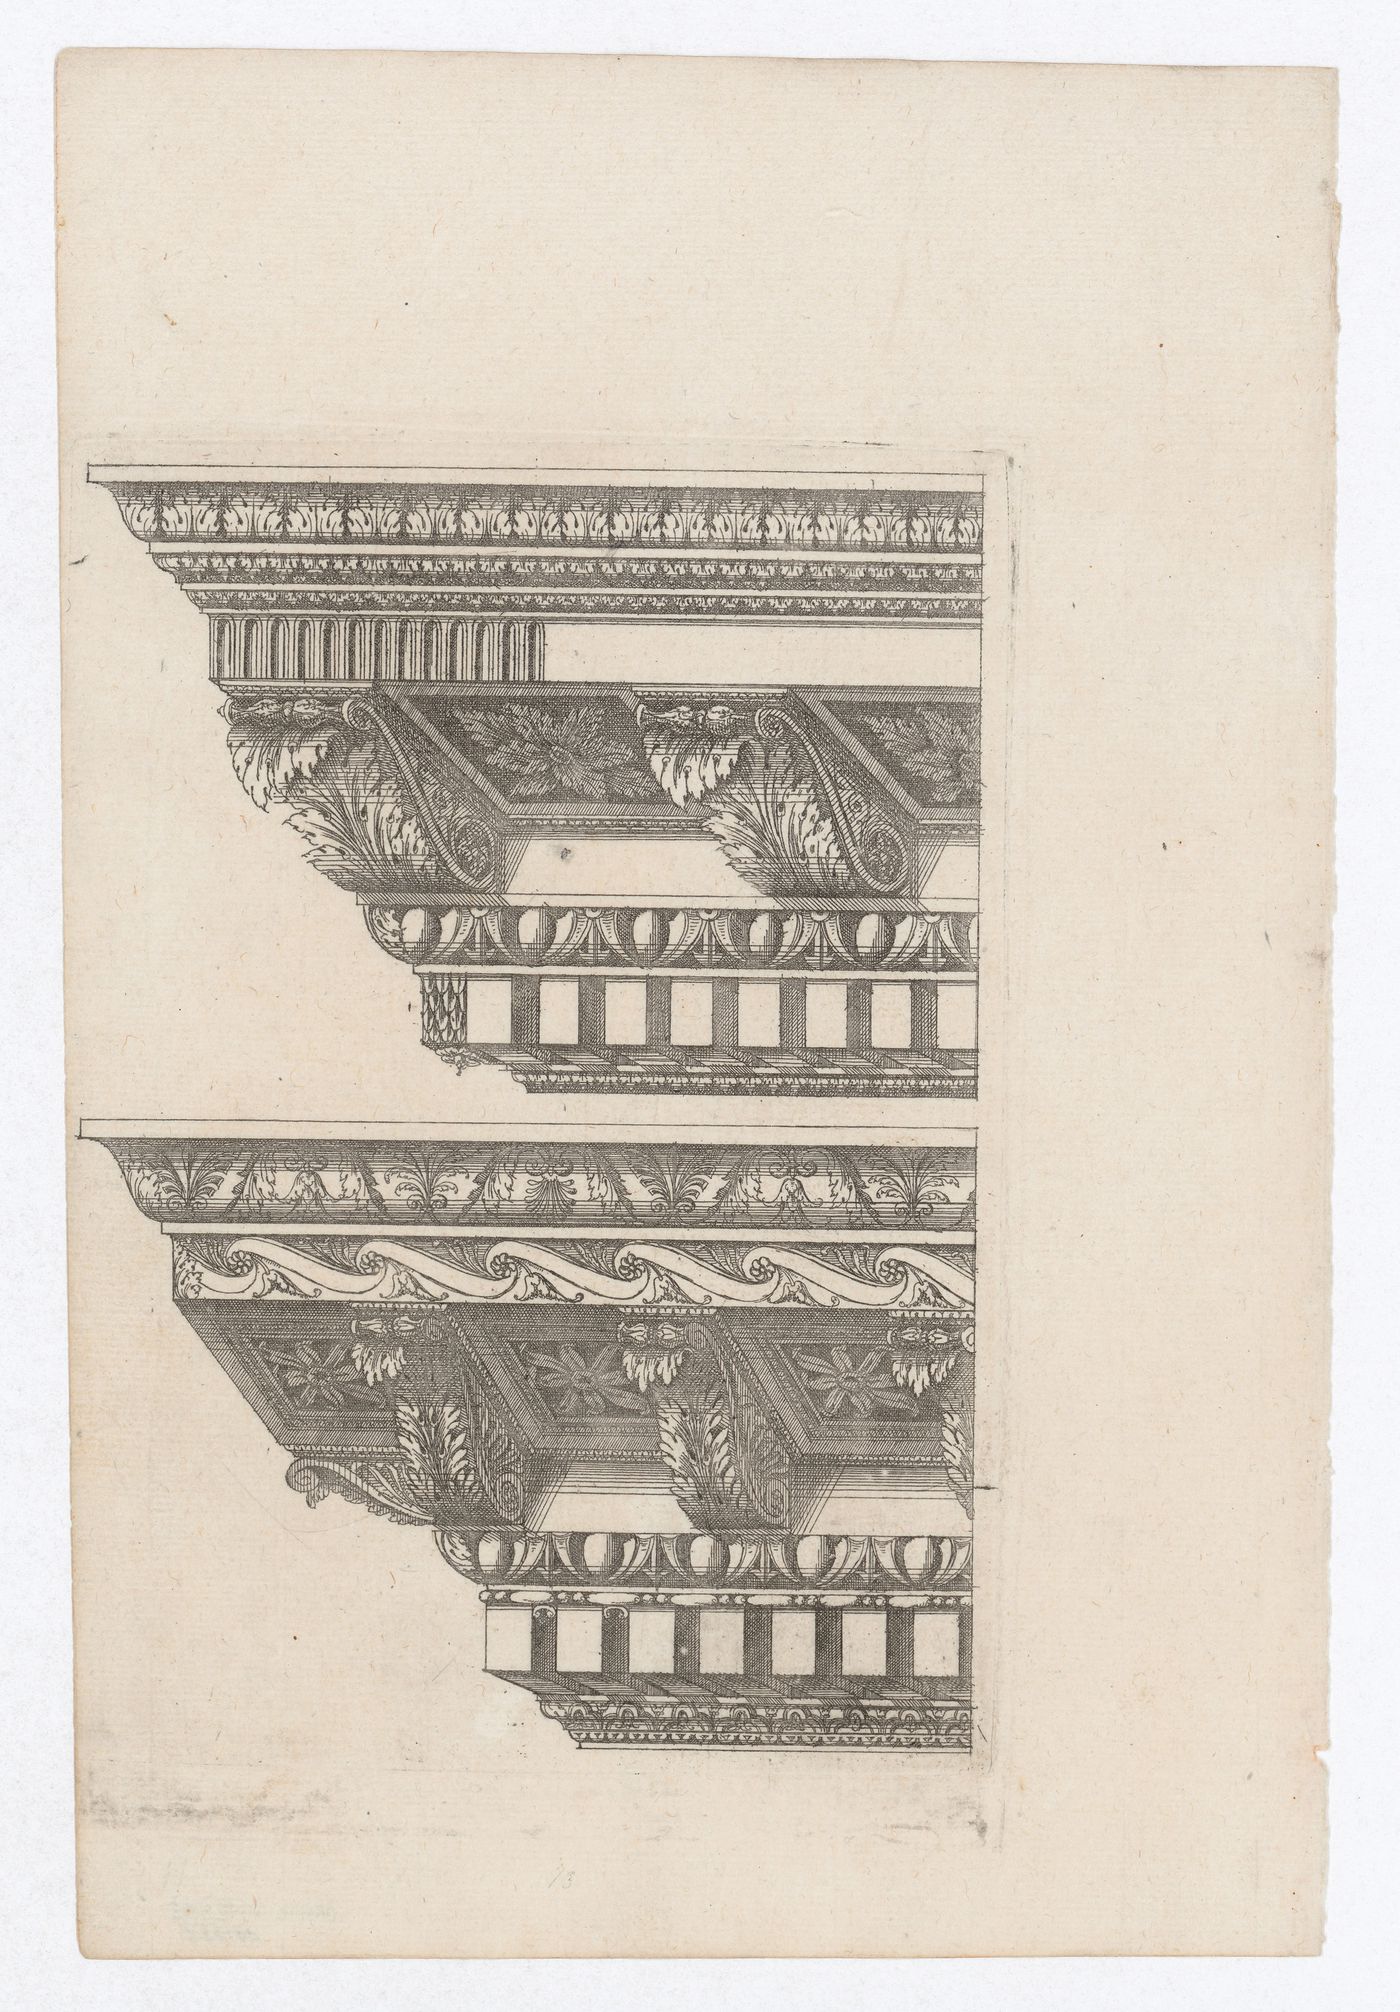 Designs for cornices